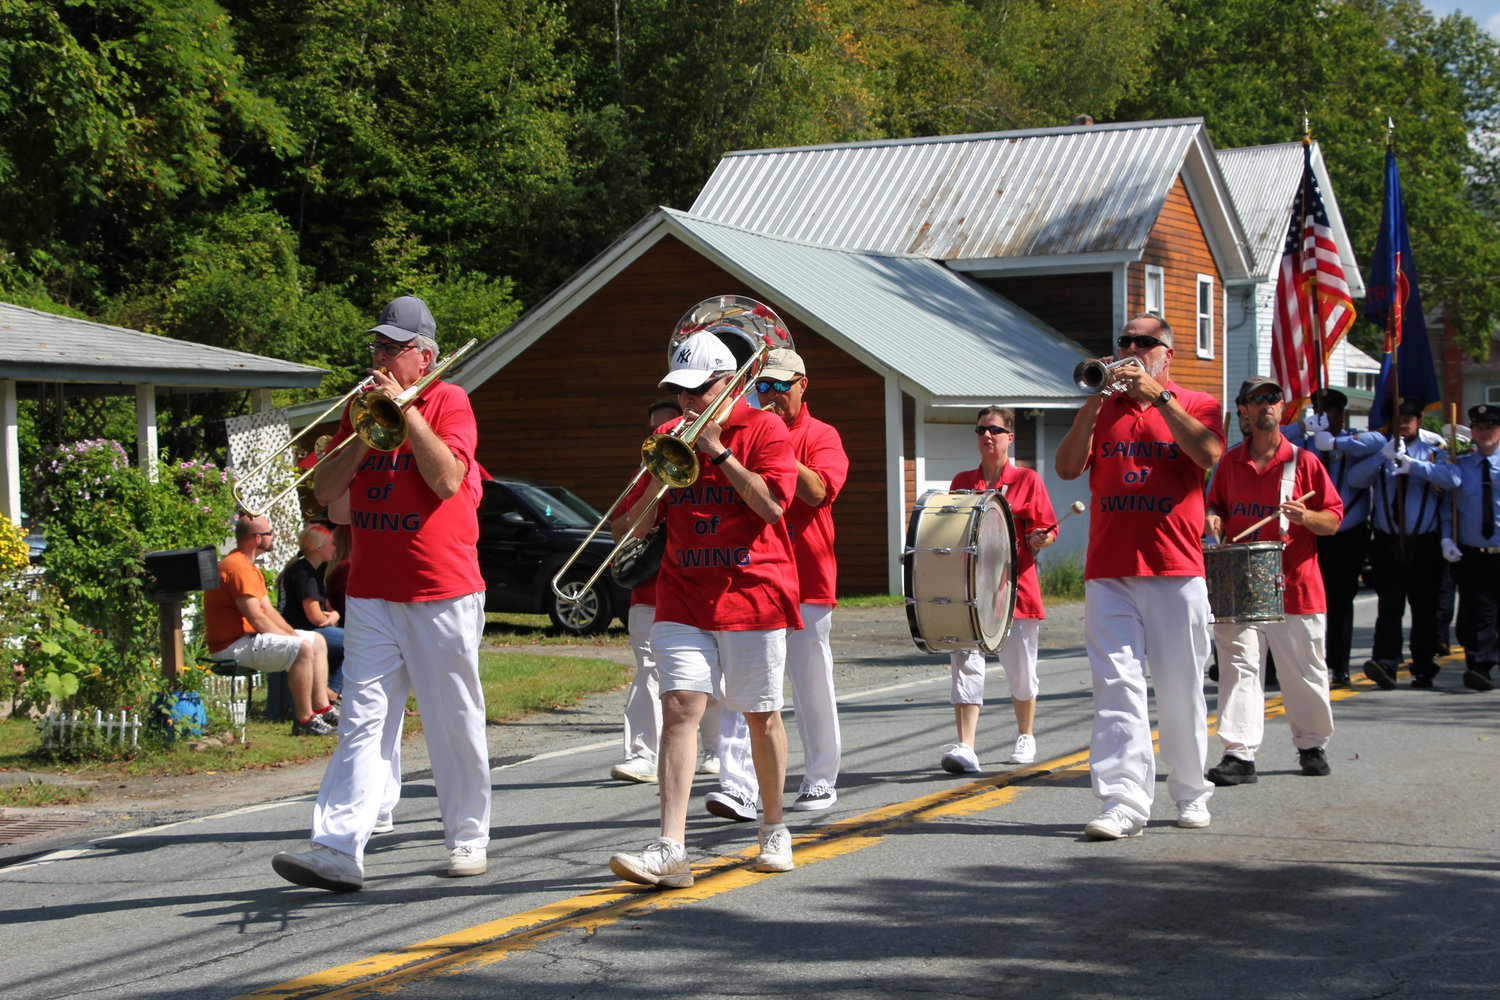 The Saints of Swing had two bands perform in the parade making it easier for the marchers to keep the cadence.